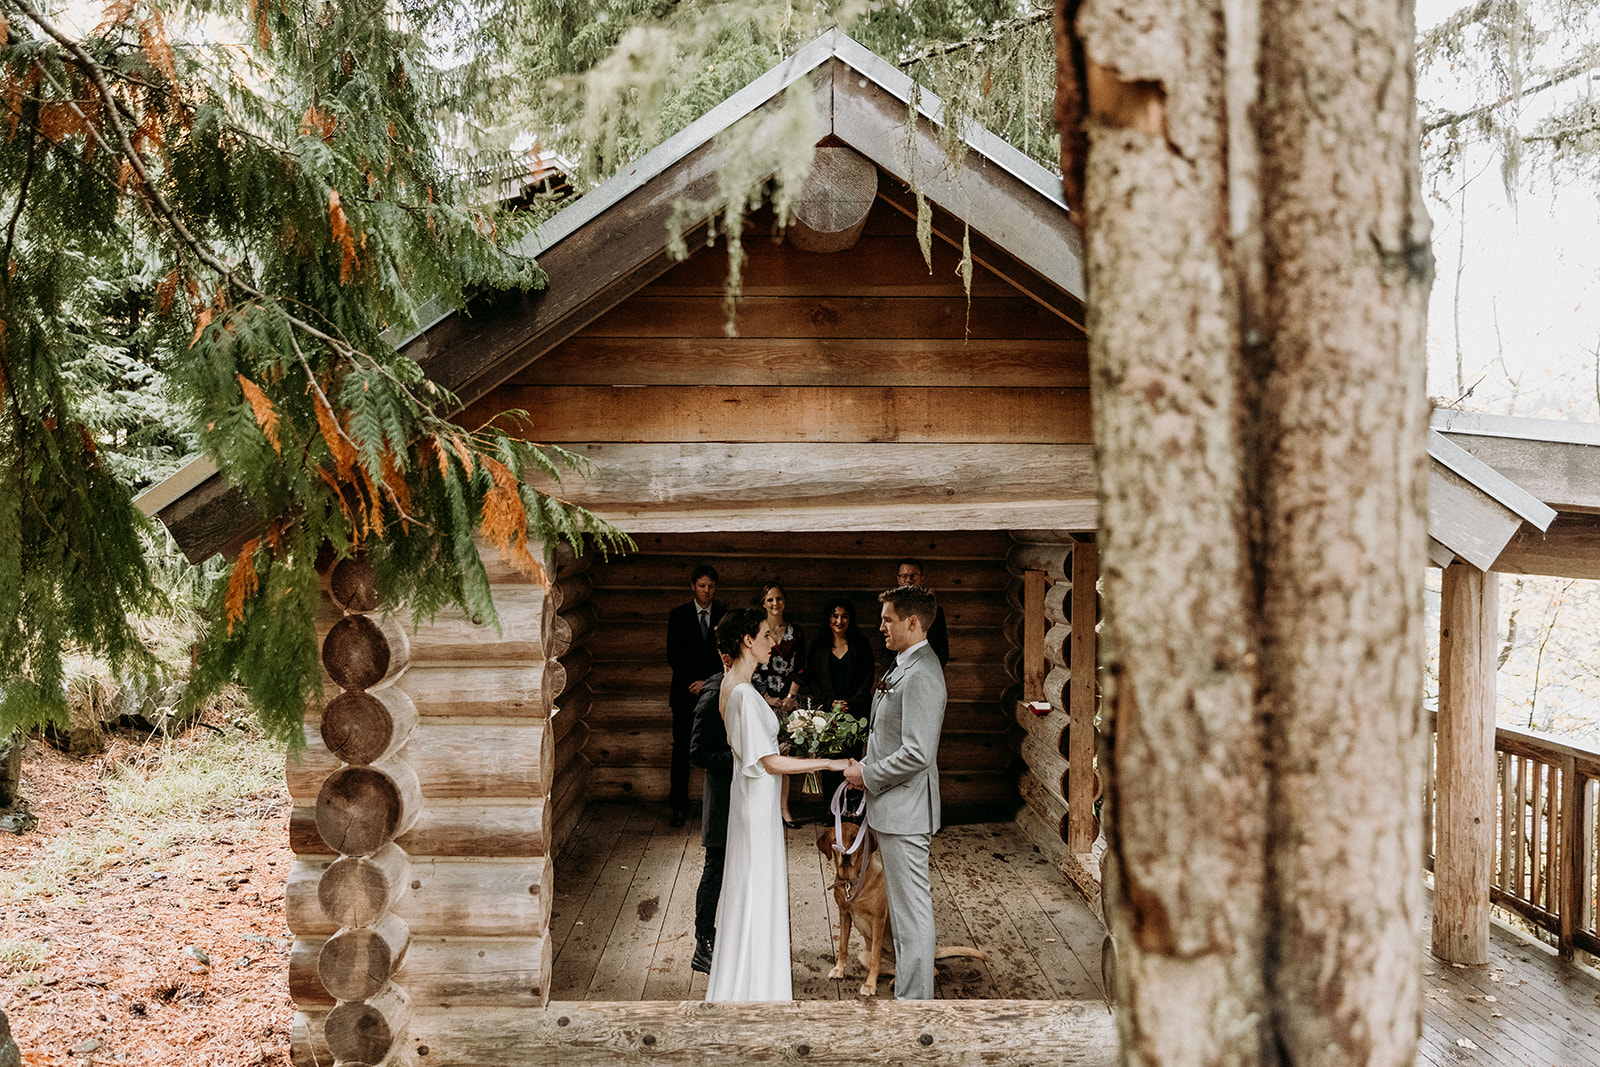 Bride and groom sharing vows in a tiny log cabin in whistler